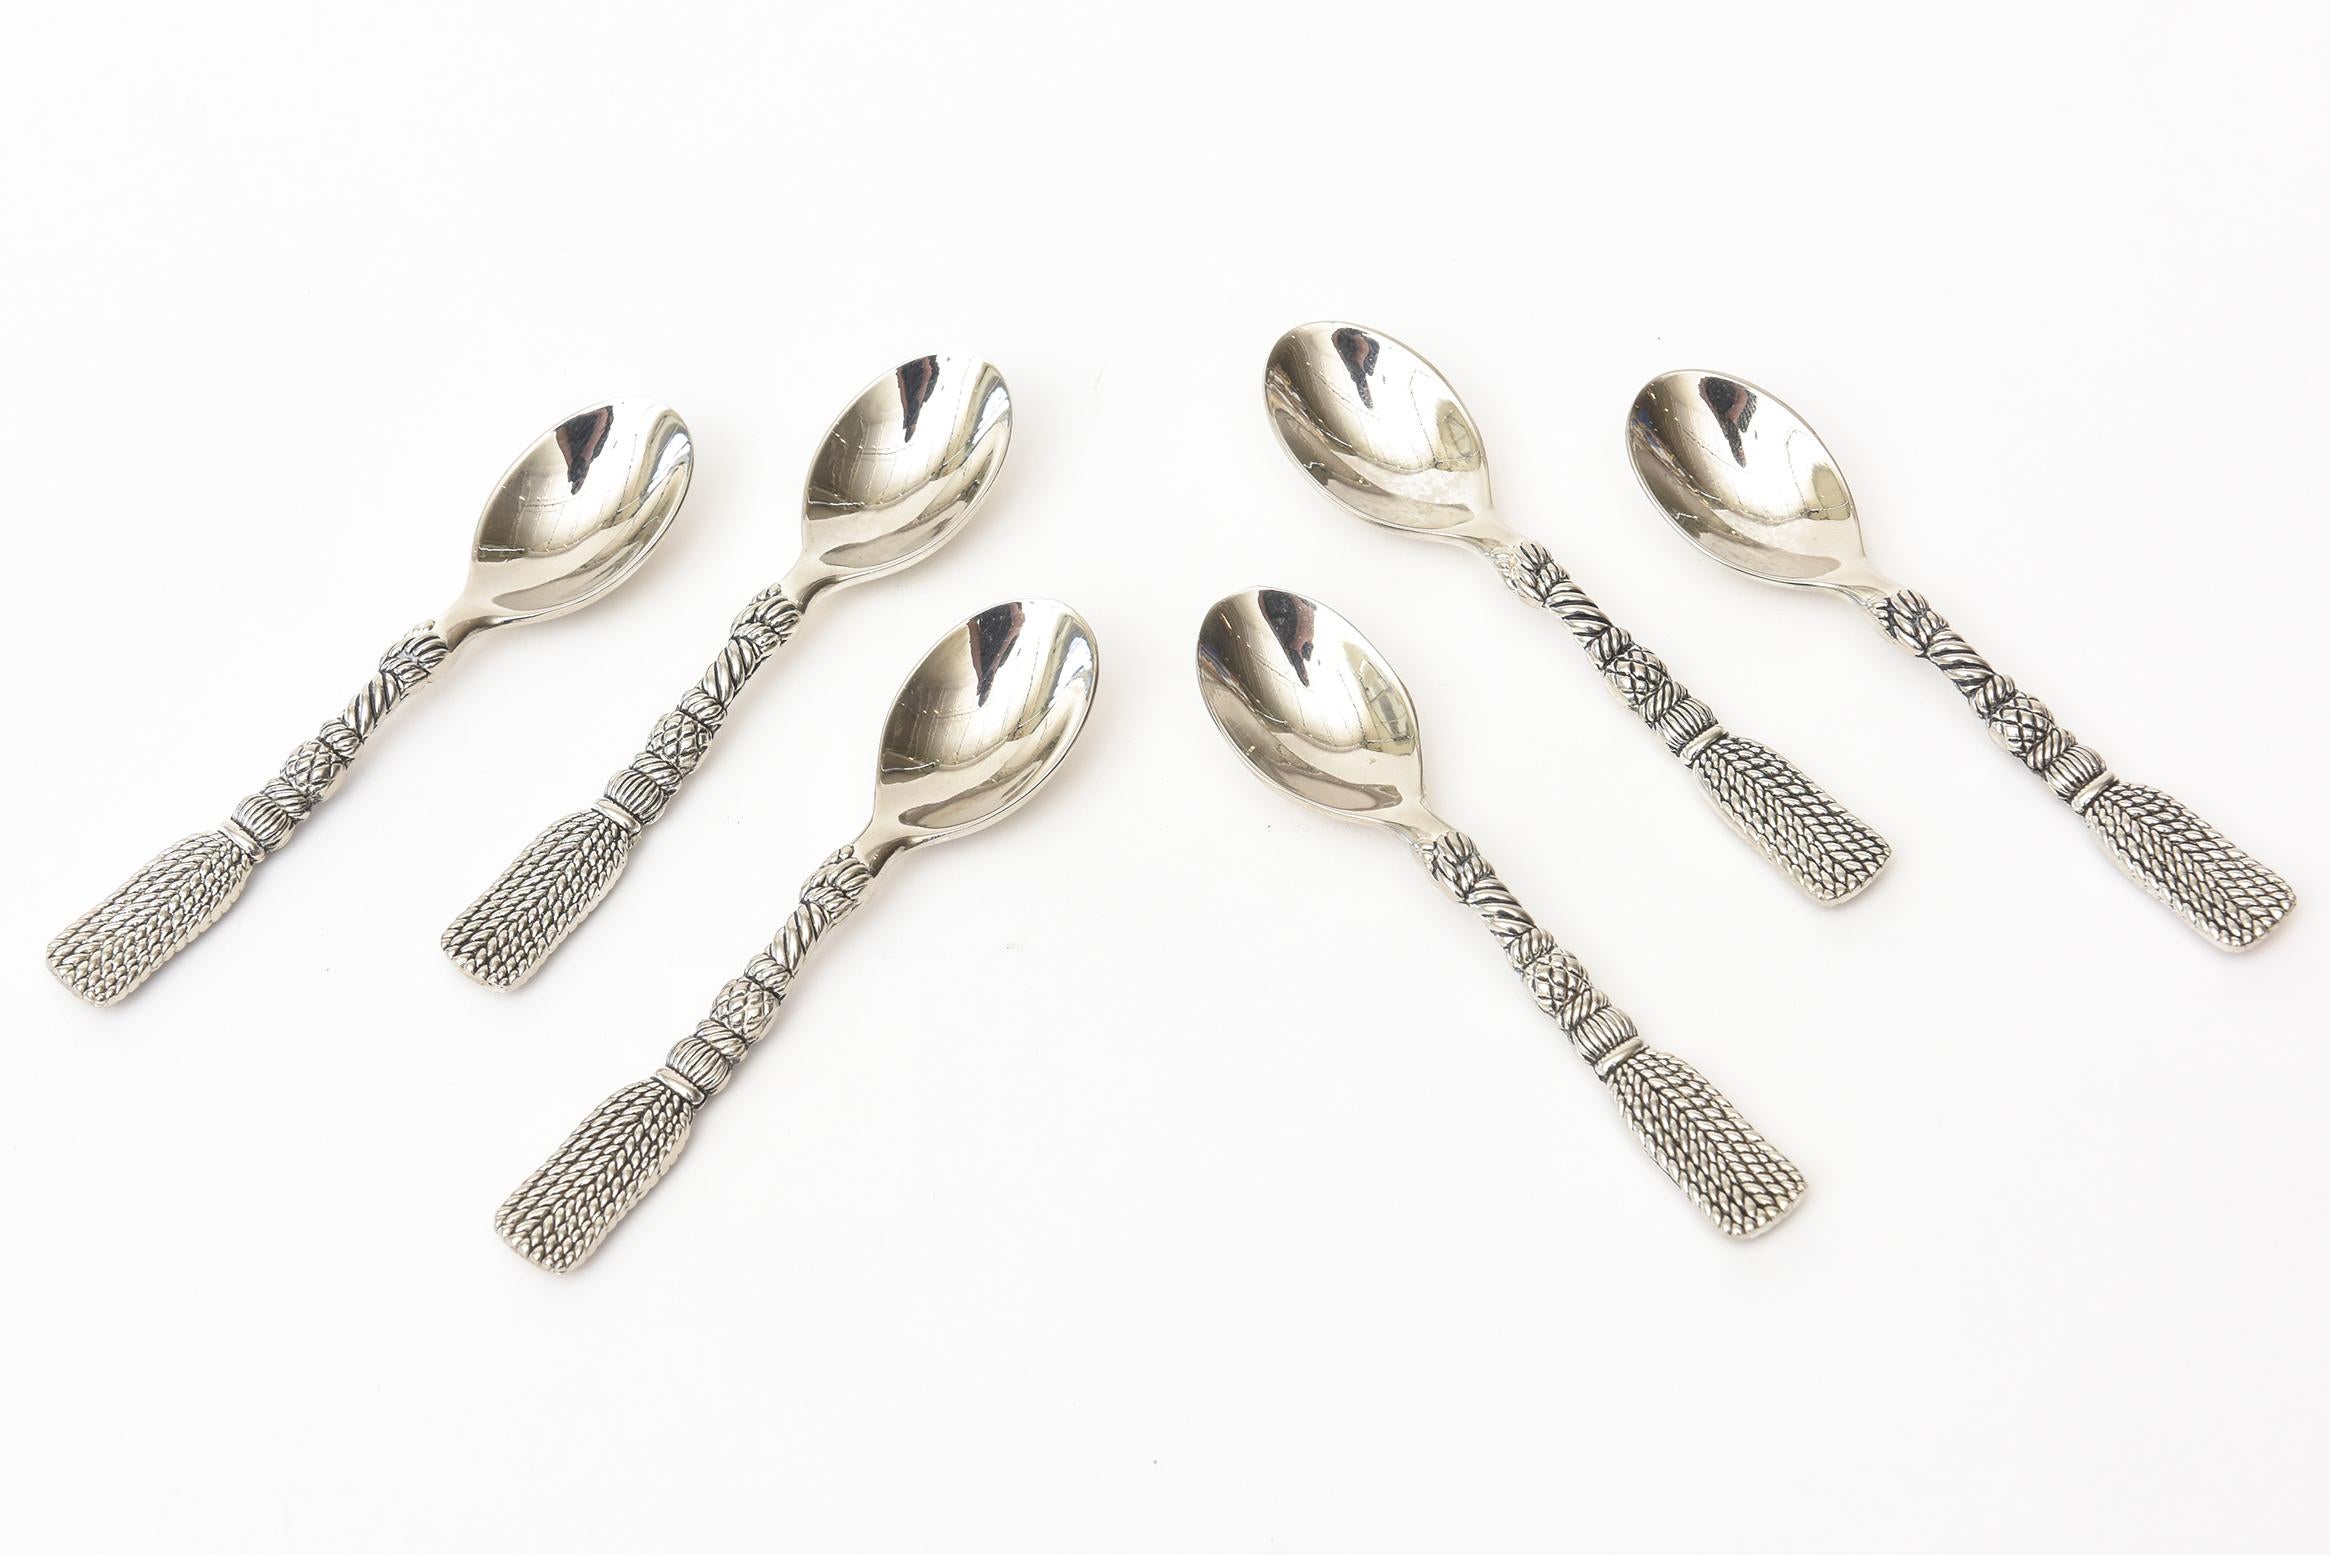 These lovely signed set of 6 stainless steel braided and tasseled roped demitasse serving spoons are signed Silen. Perfect for your morning expresso or coffee. They are from the 1970s. They have an elegance to them. Also can be used for serving.